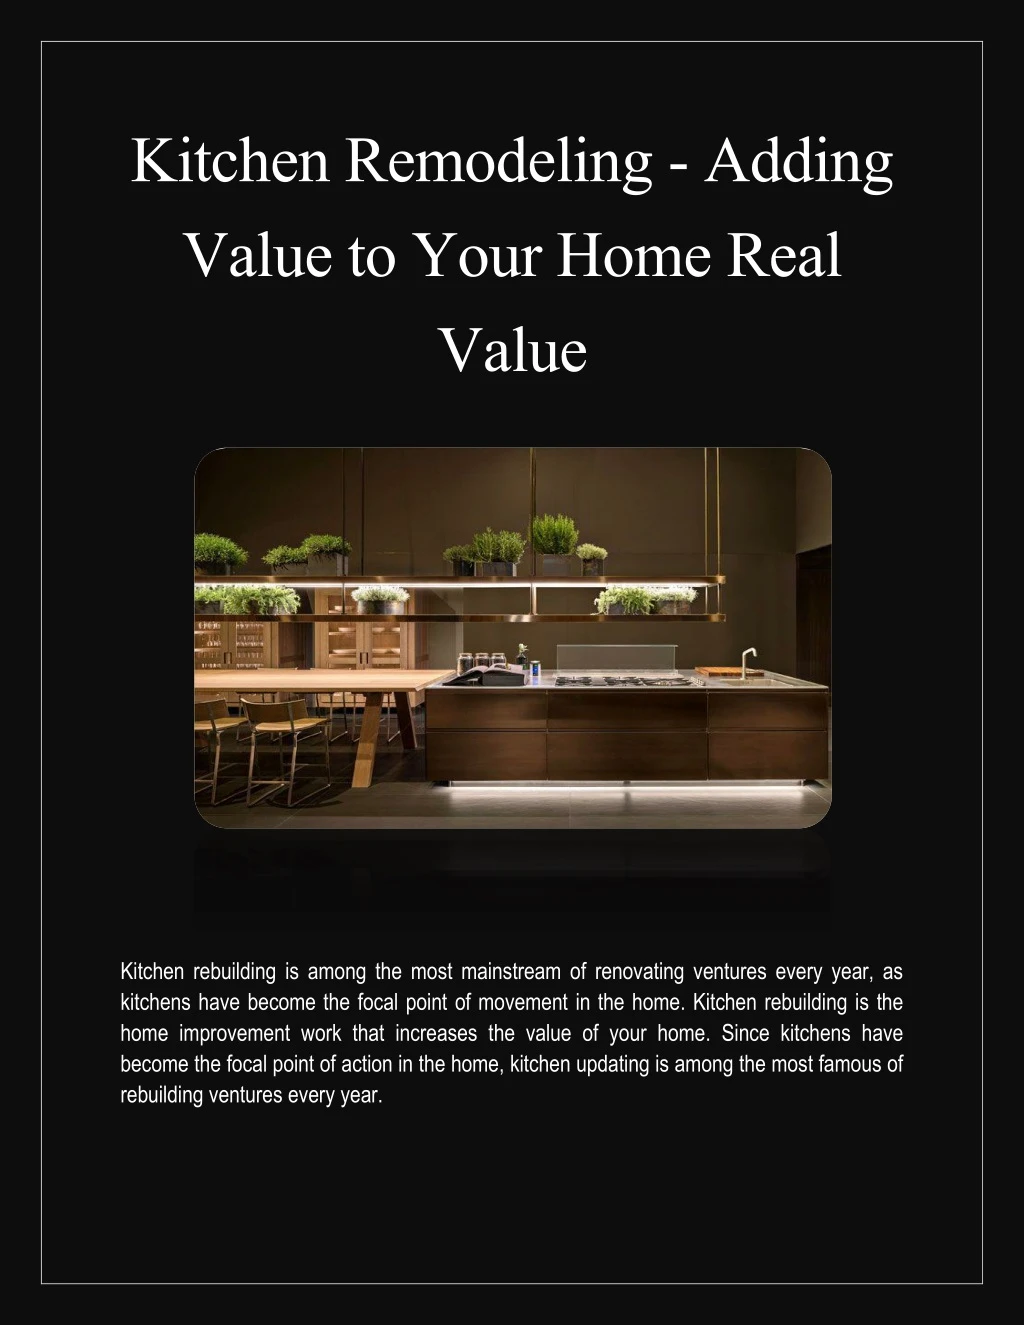 kitchen remodeling adding value to your home real